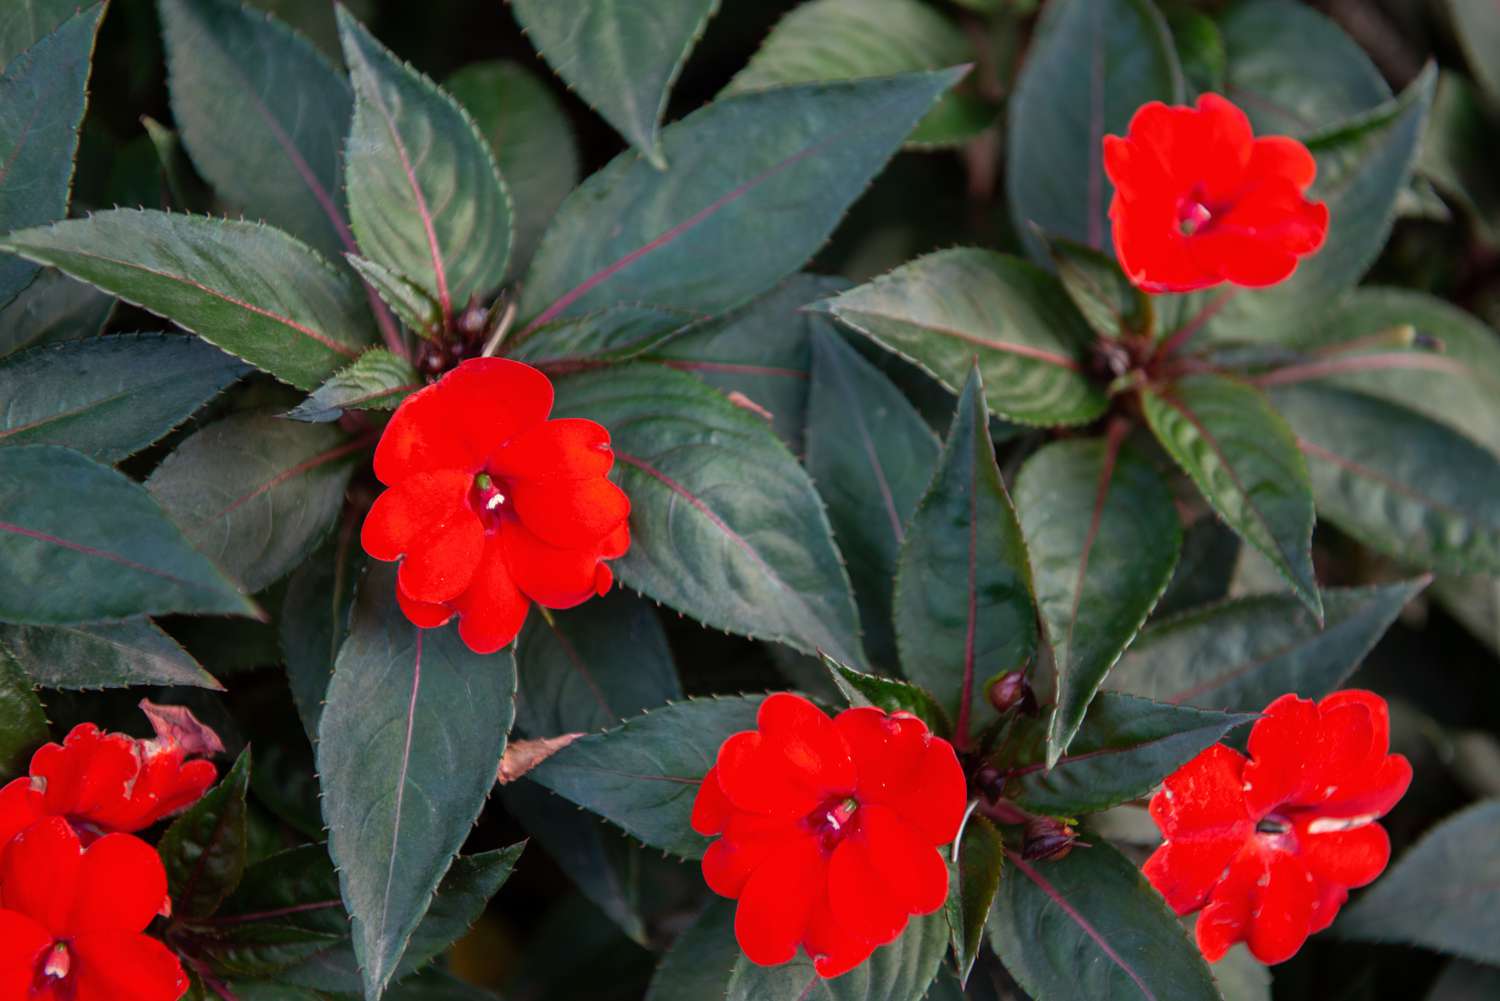 SunPatiens plant with rounded bright red flowers surrounded by dark green pointed leaves 